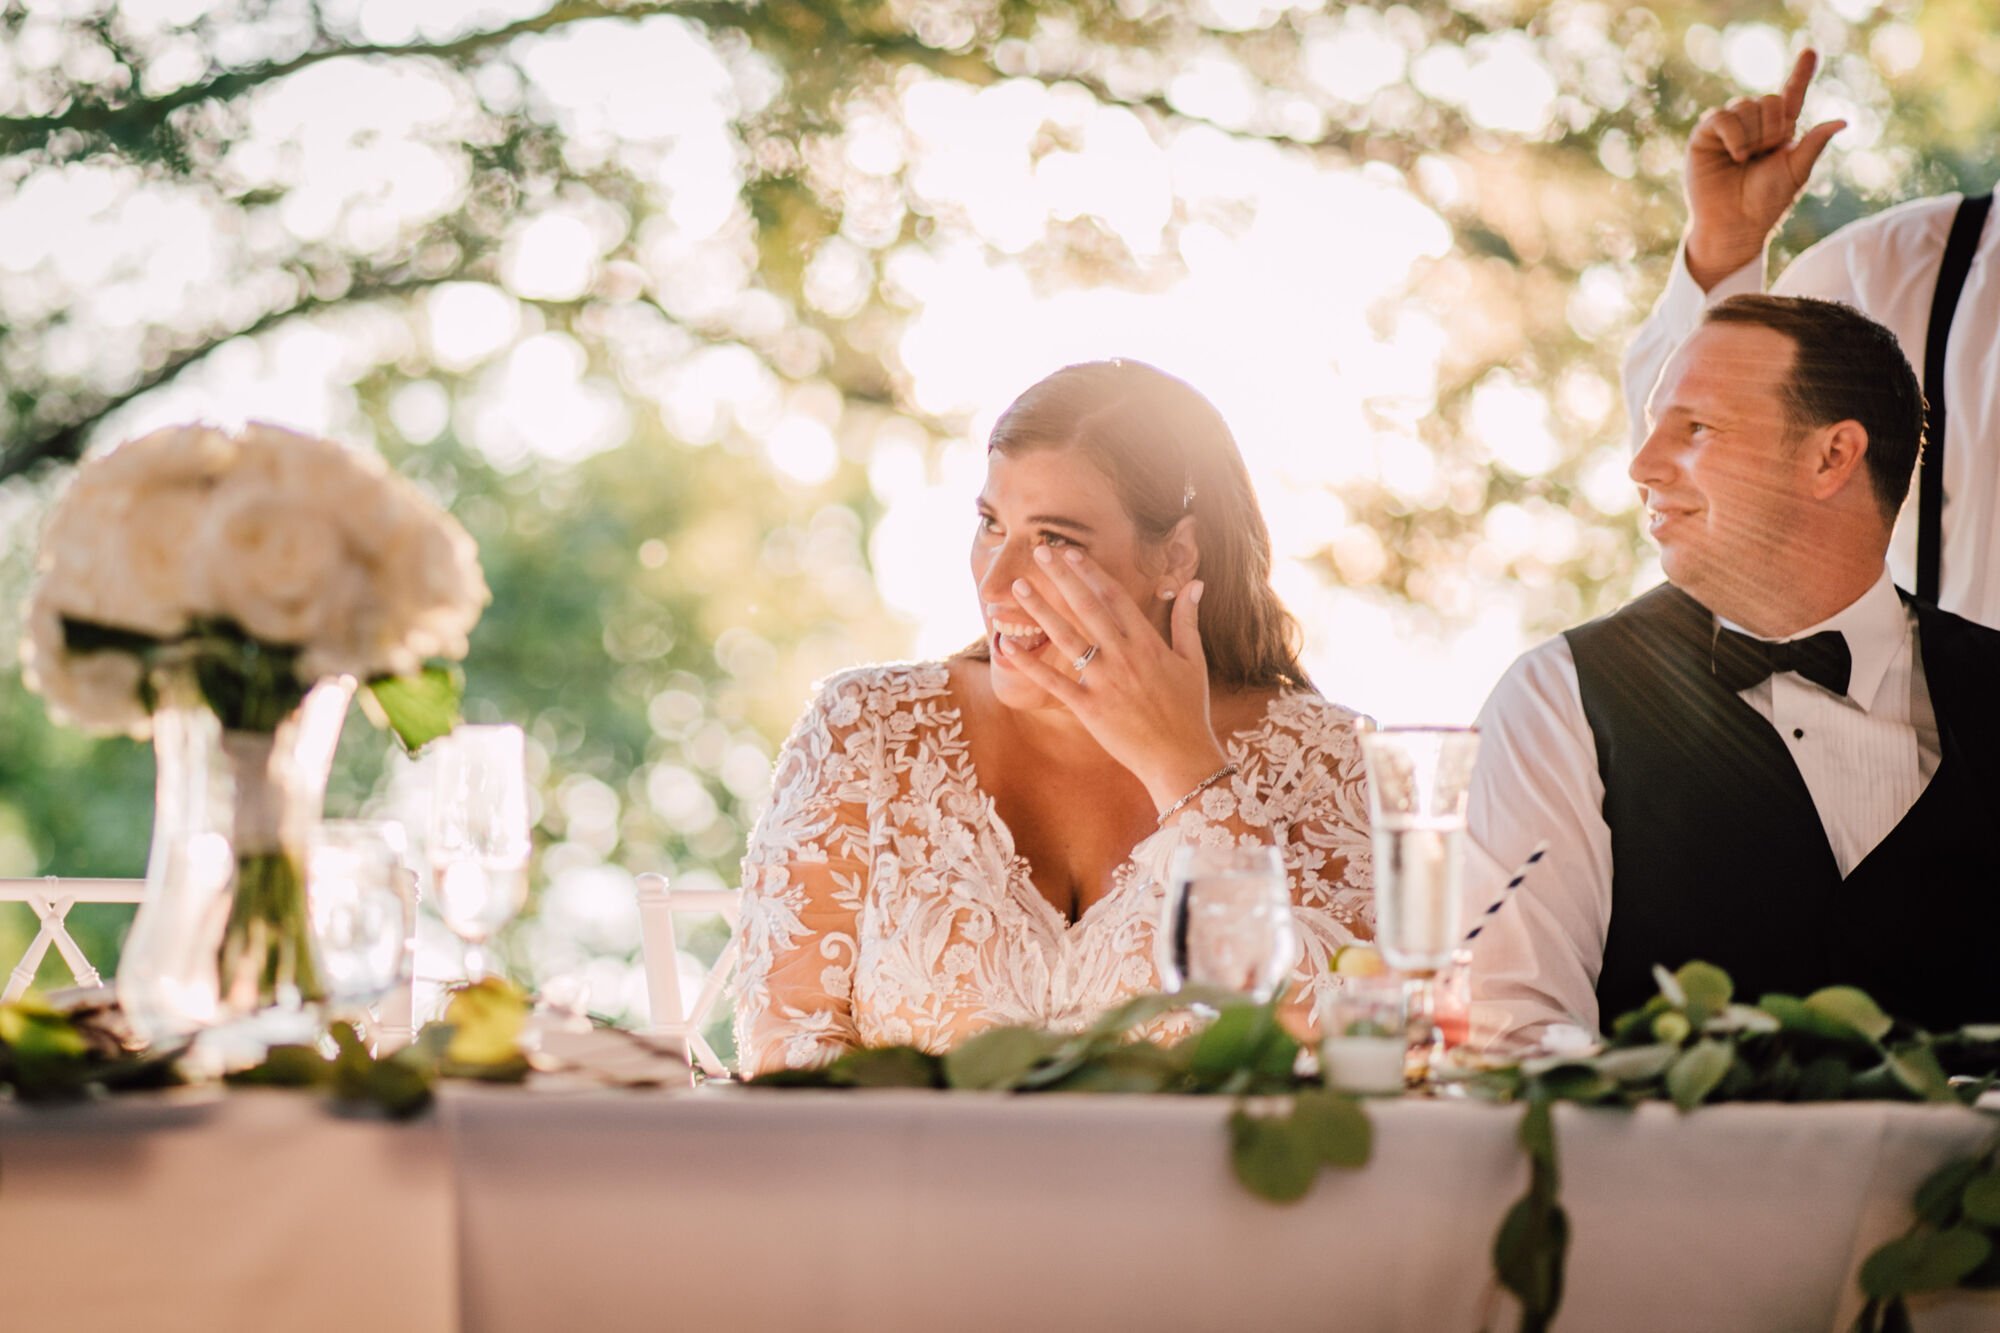  Bride tears up during the toast at her upstate ny wedding 